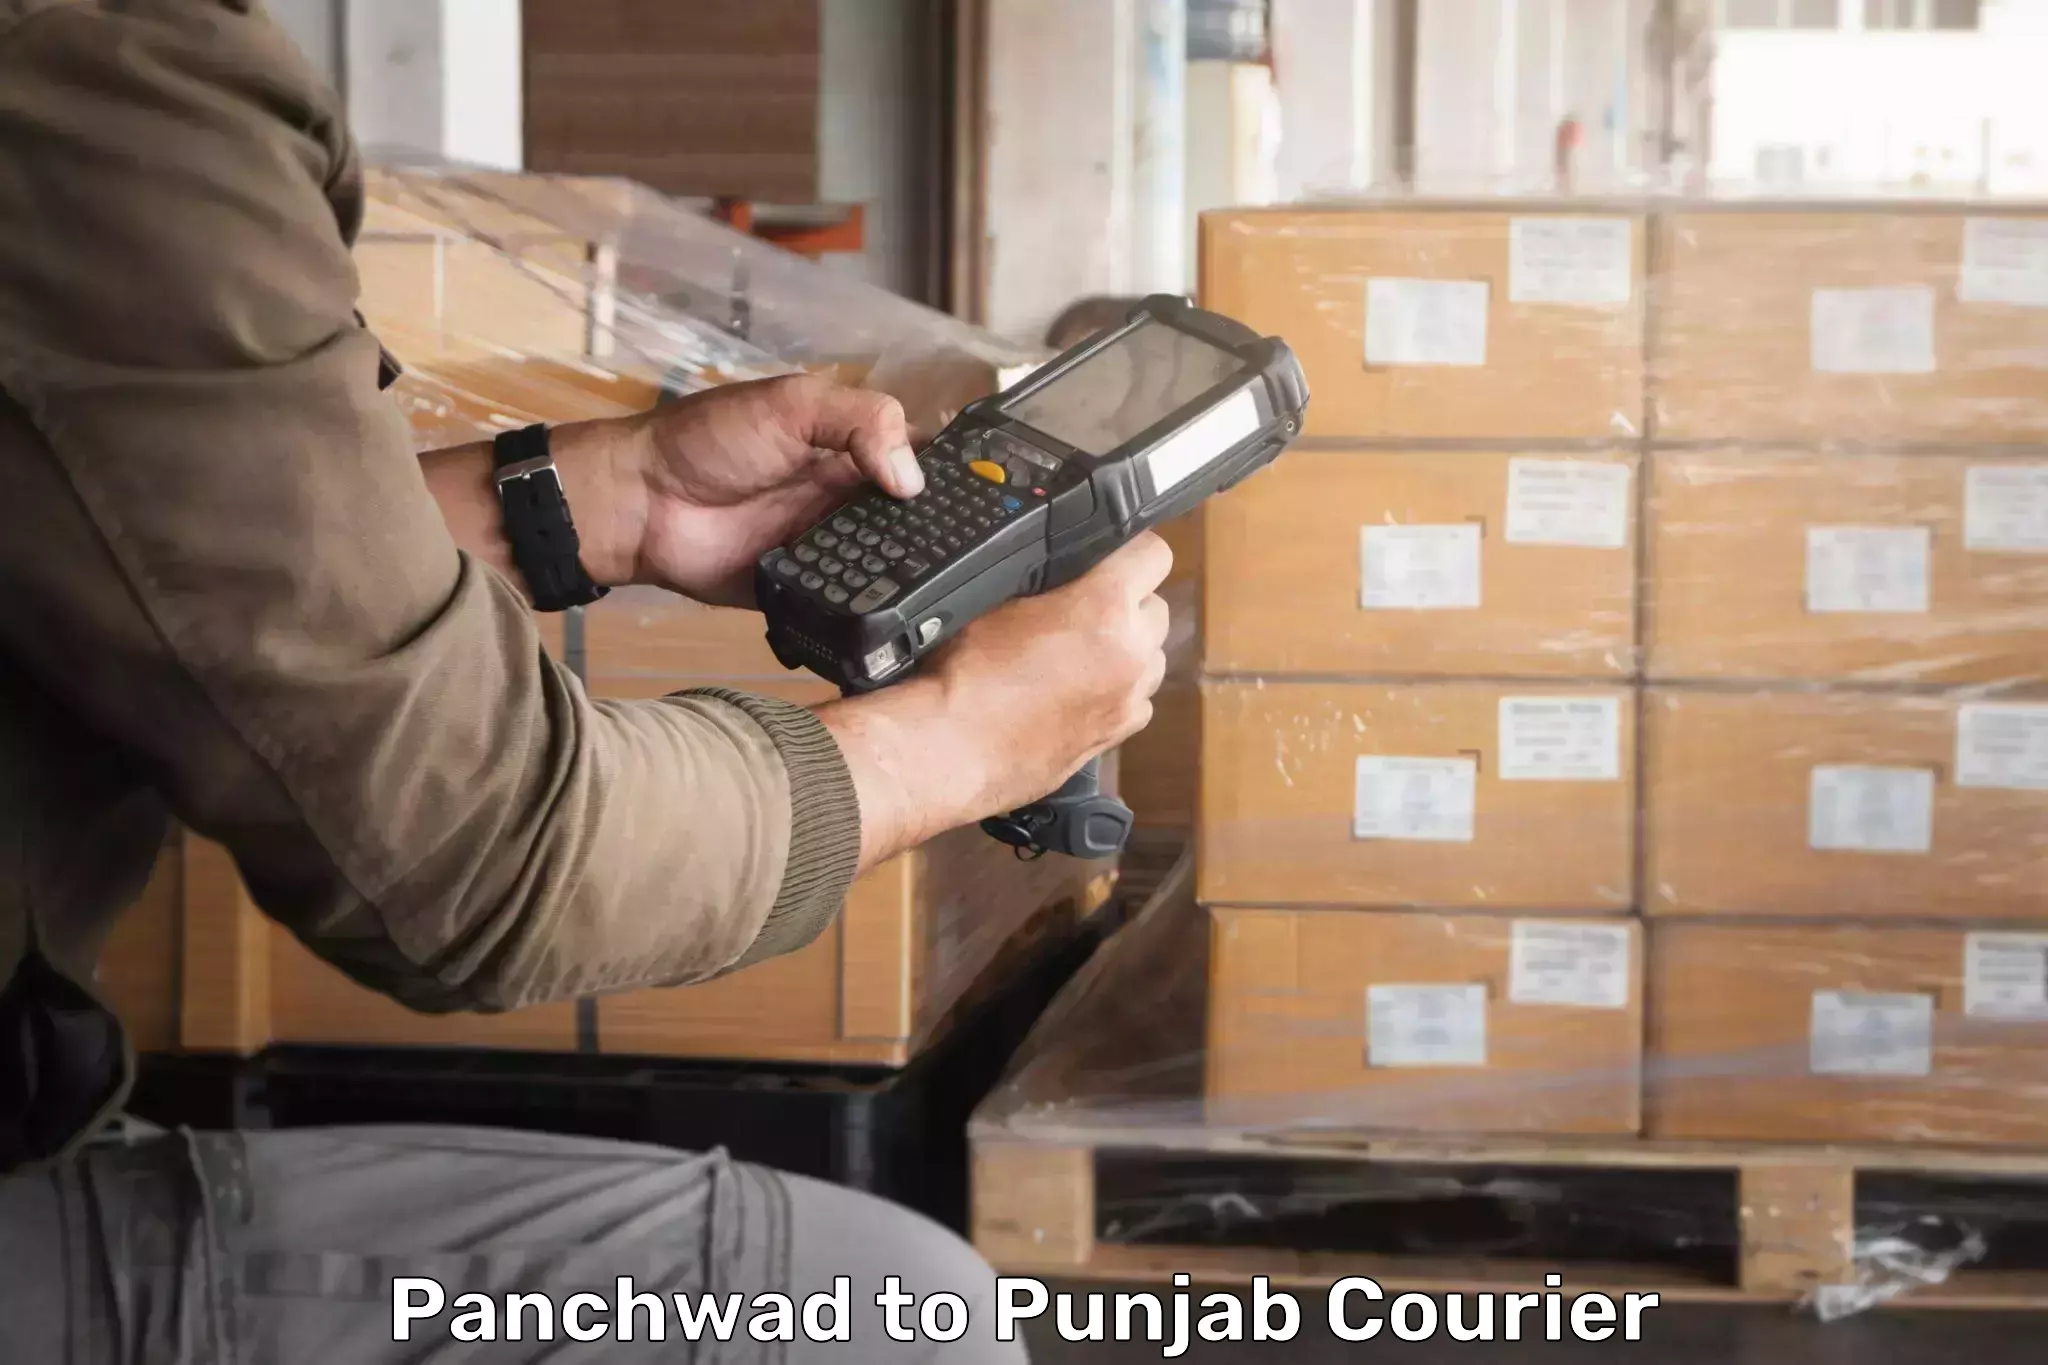 On-call courier service Panchwad to Ludhiana